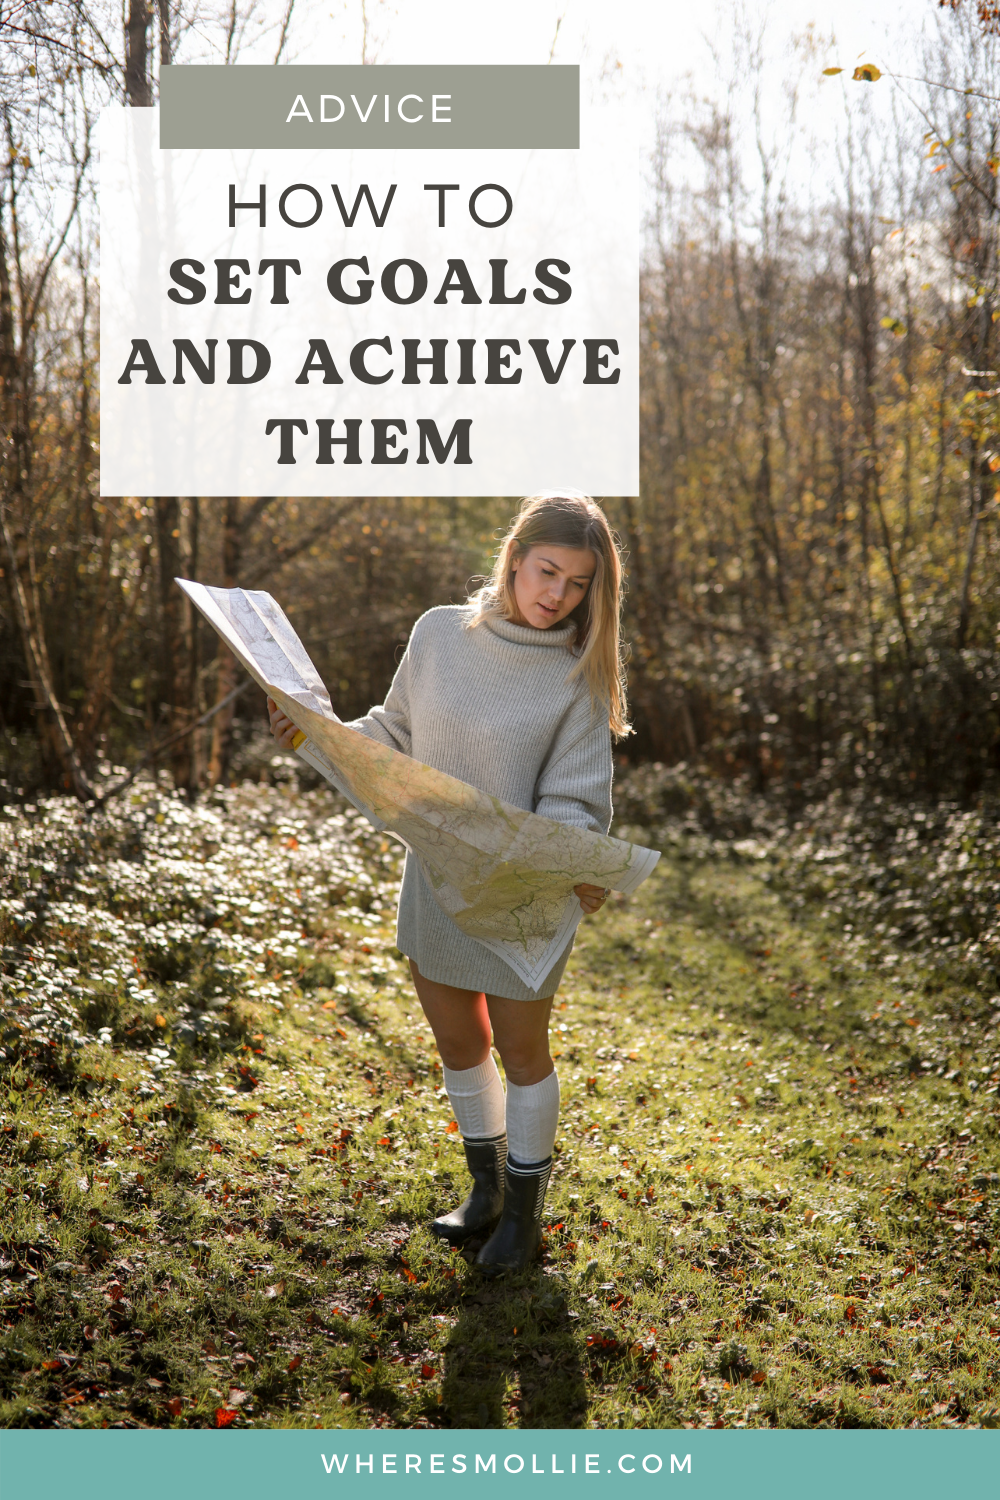 Goal setting: How to bring your dreams to life